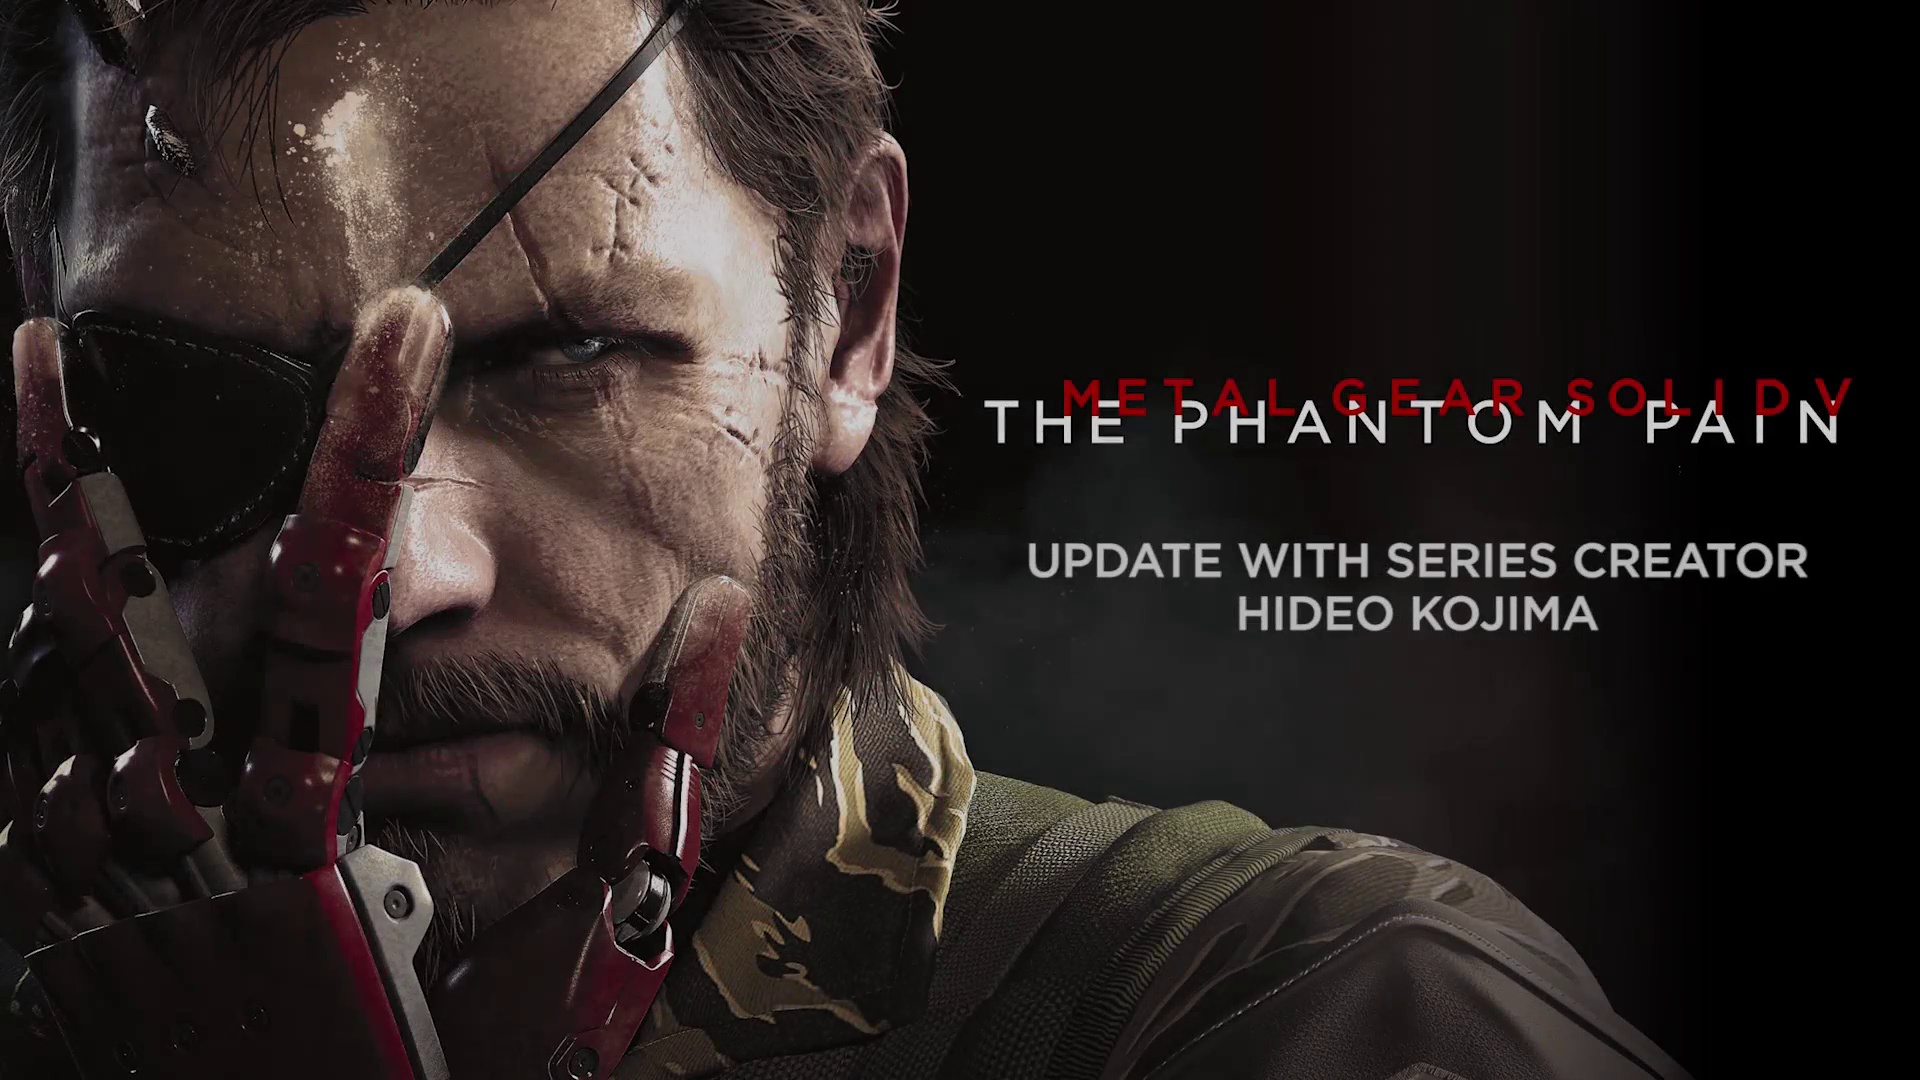 metal gear solid v pc latest patch download